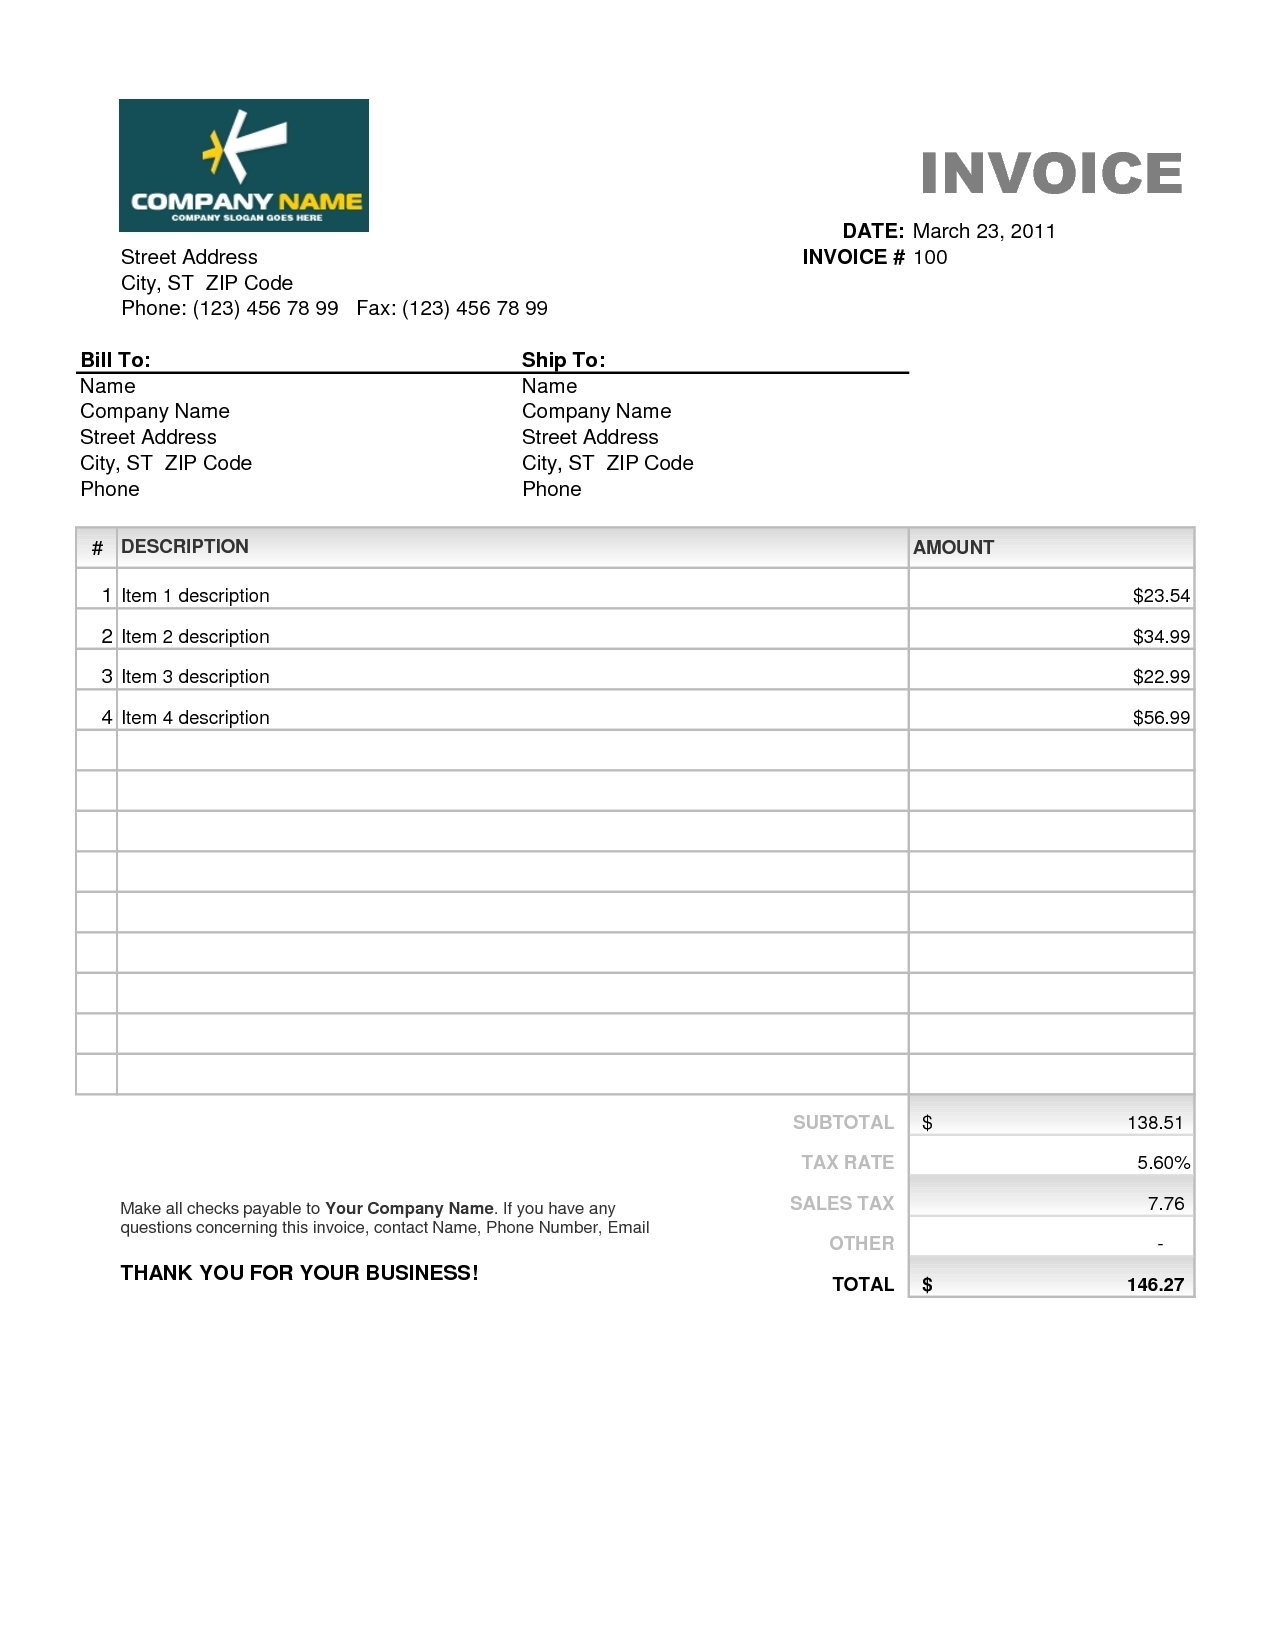 invoice excel template free download invoice template free 2016 invoice template free download